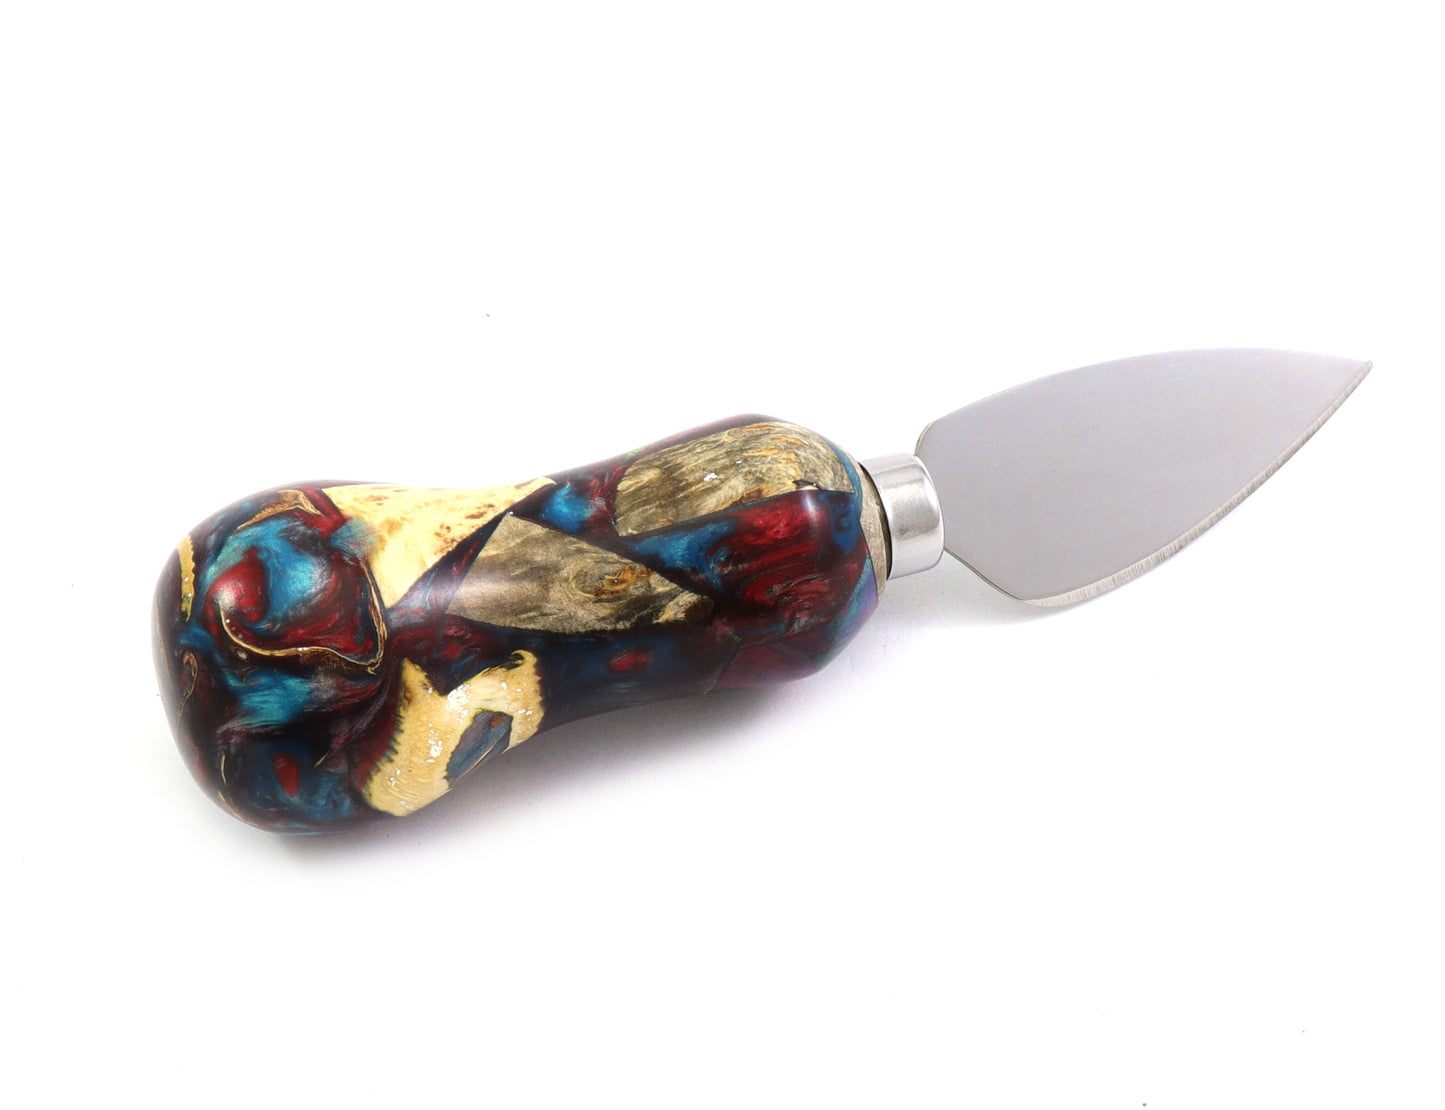 Stainless Steel Cheese Knife - Available in 6 different styles